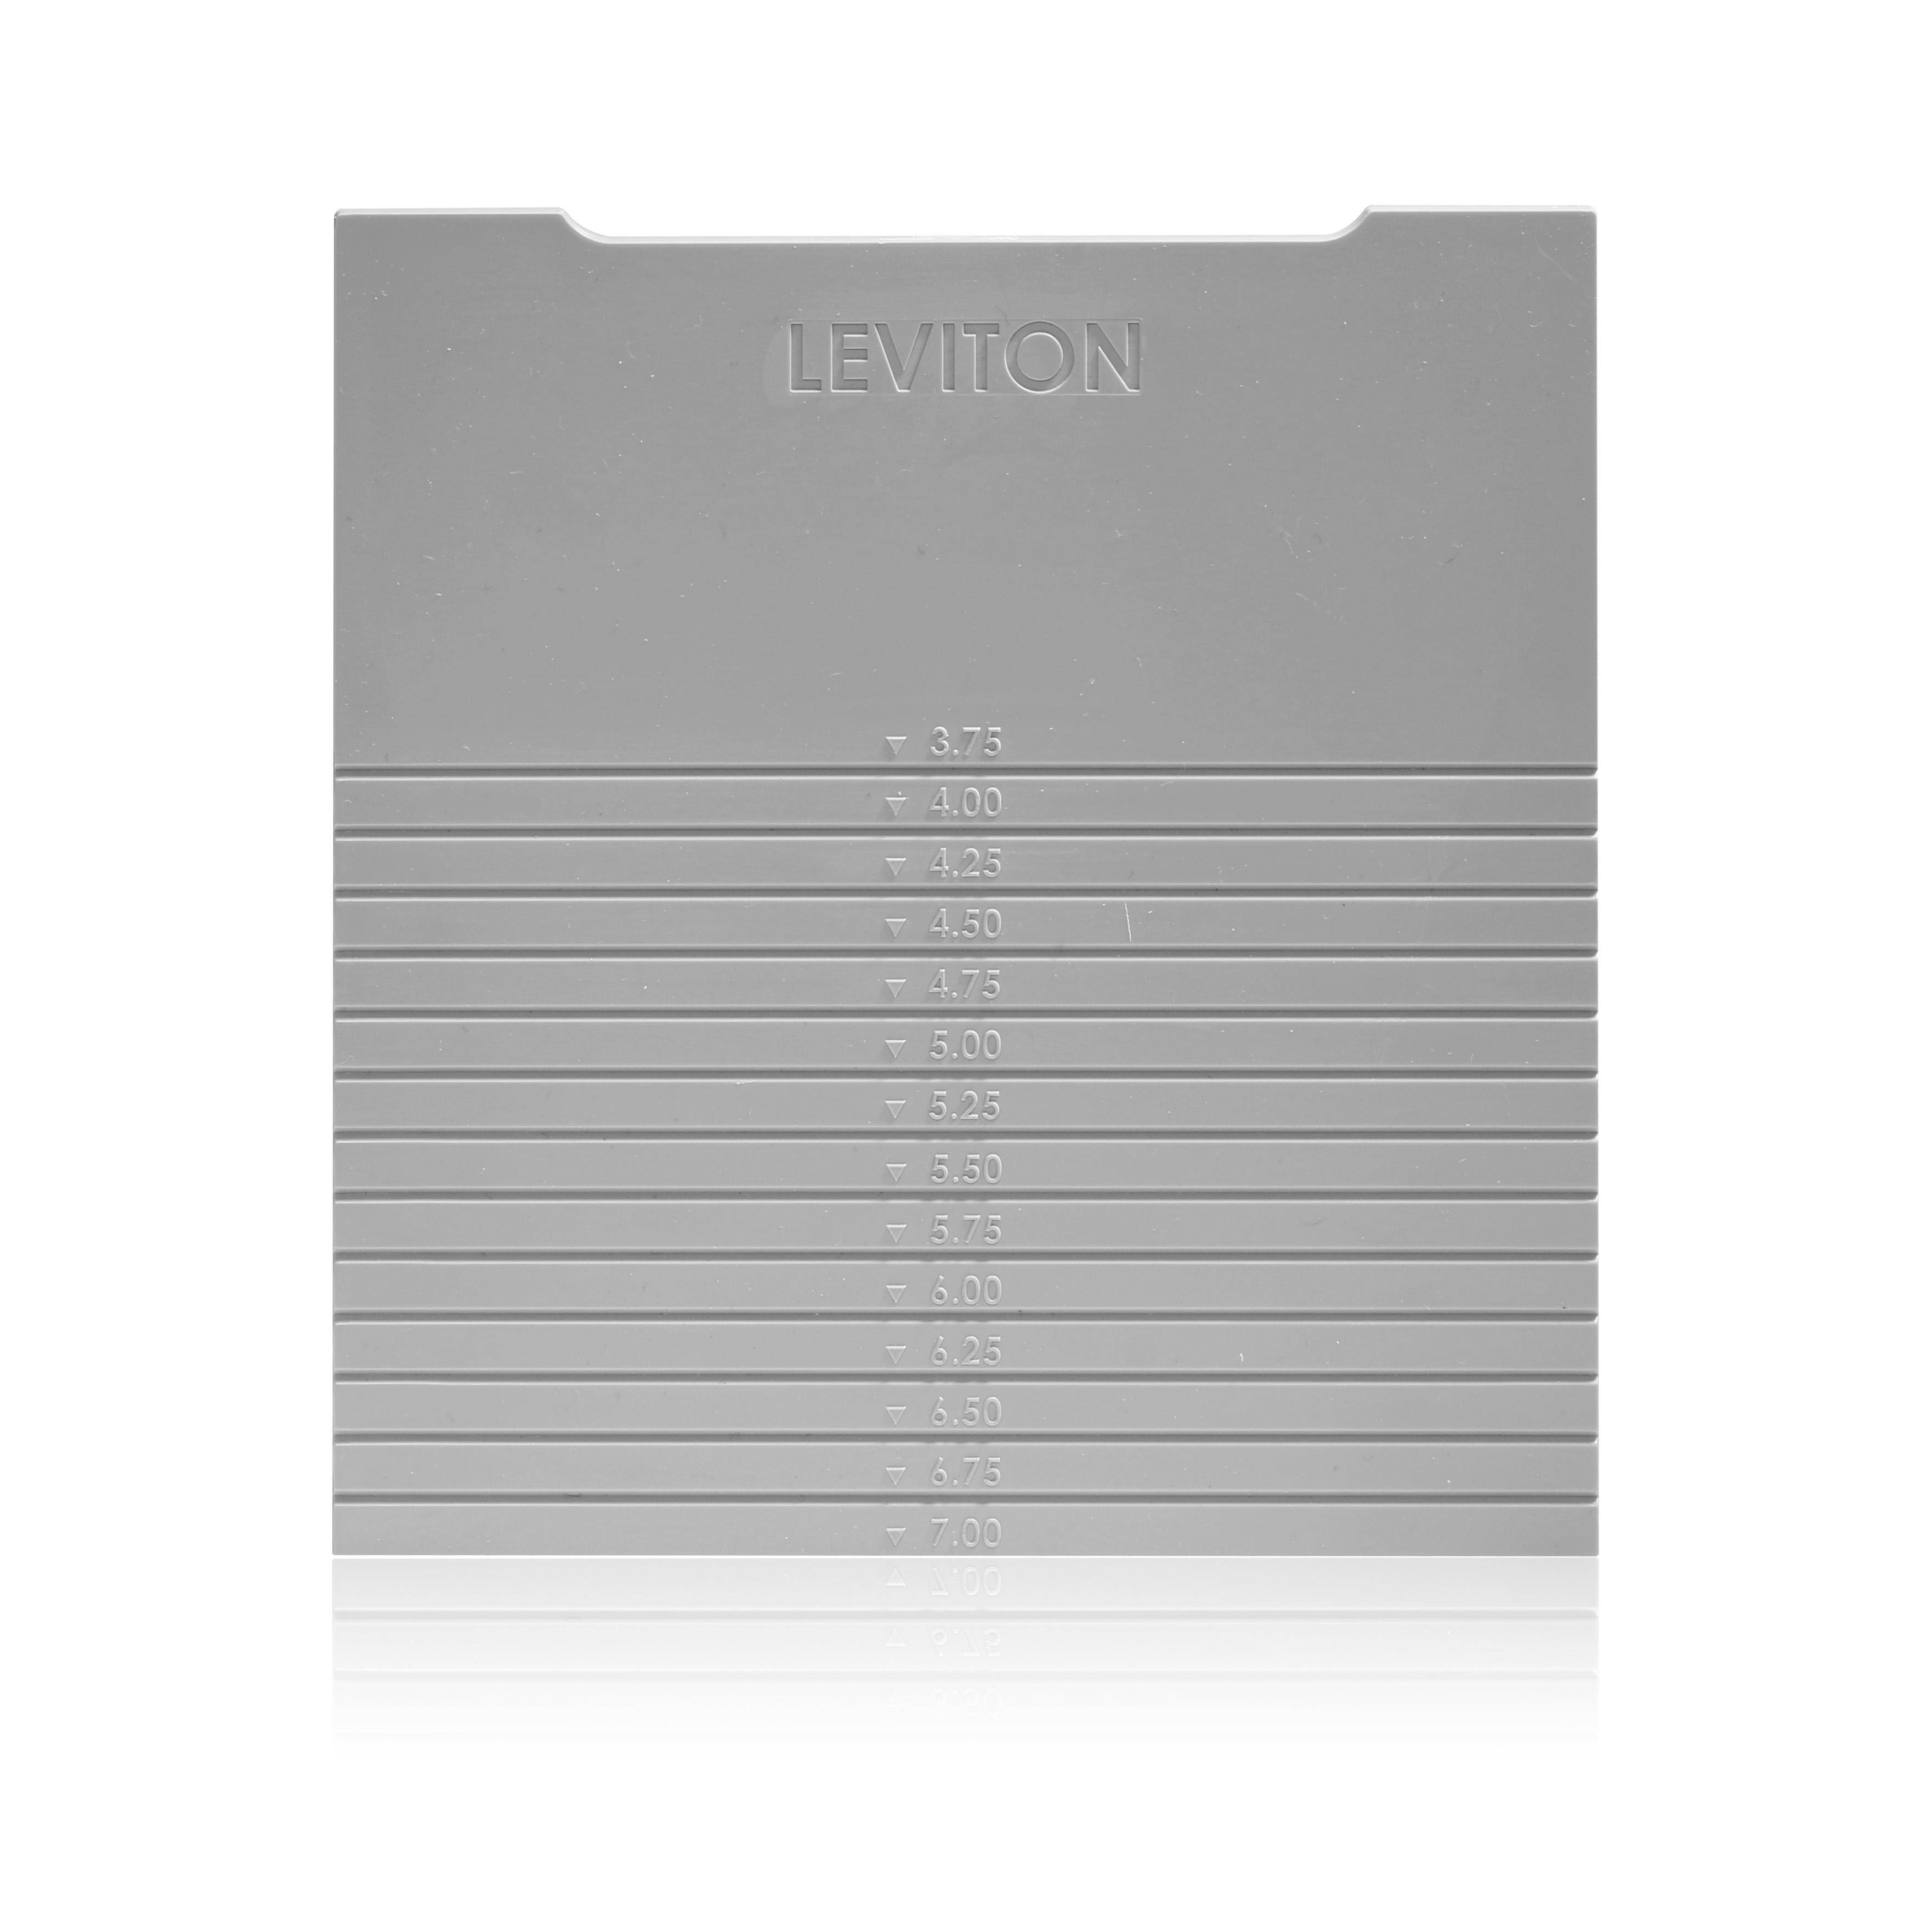 Leviton® 460C7WLEV LEV Series 3-Phase Dustight North American Rated Watertight Pin and Sleeve Connector, 480 VAC, 60 A, 3 Poles, 4 Wires, Red